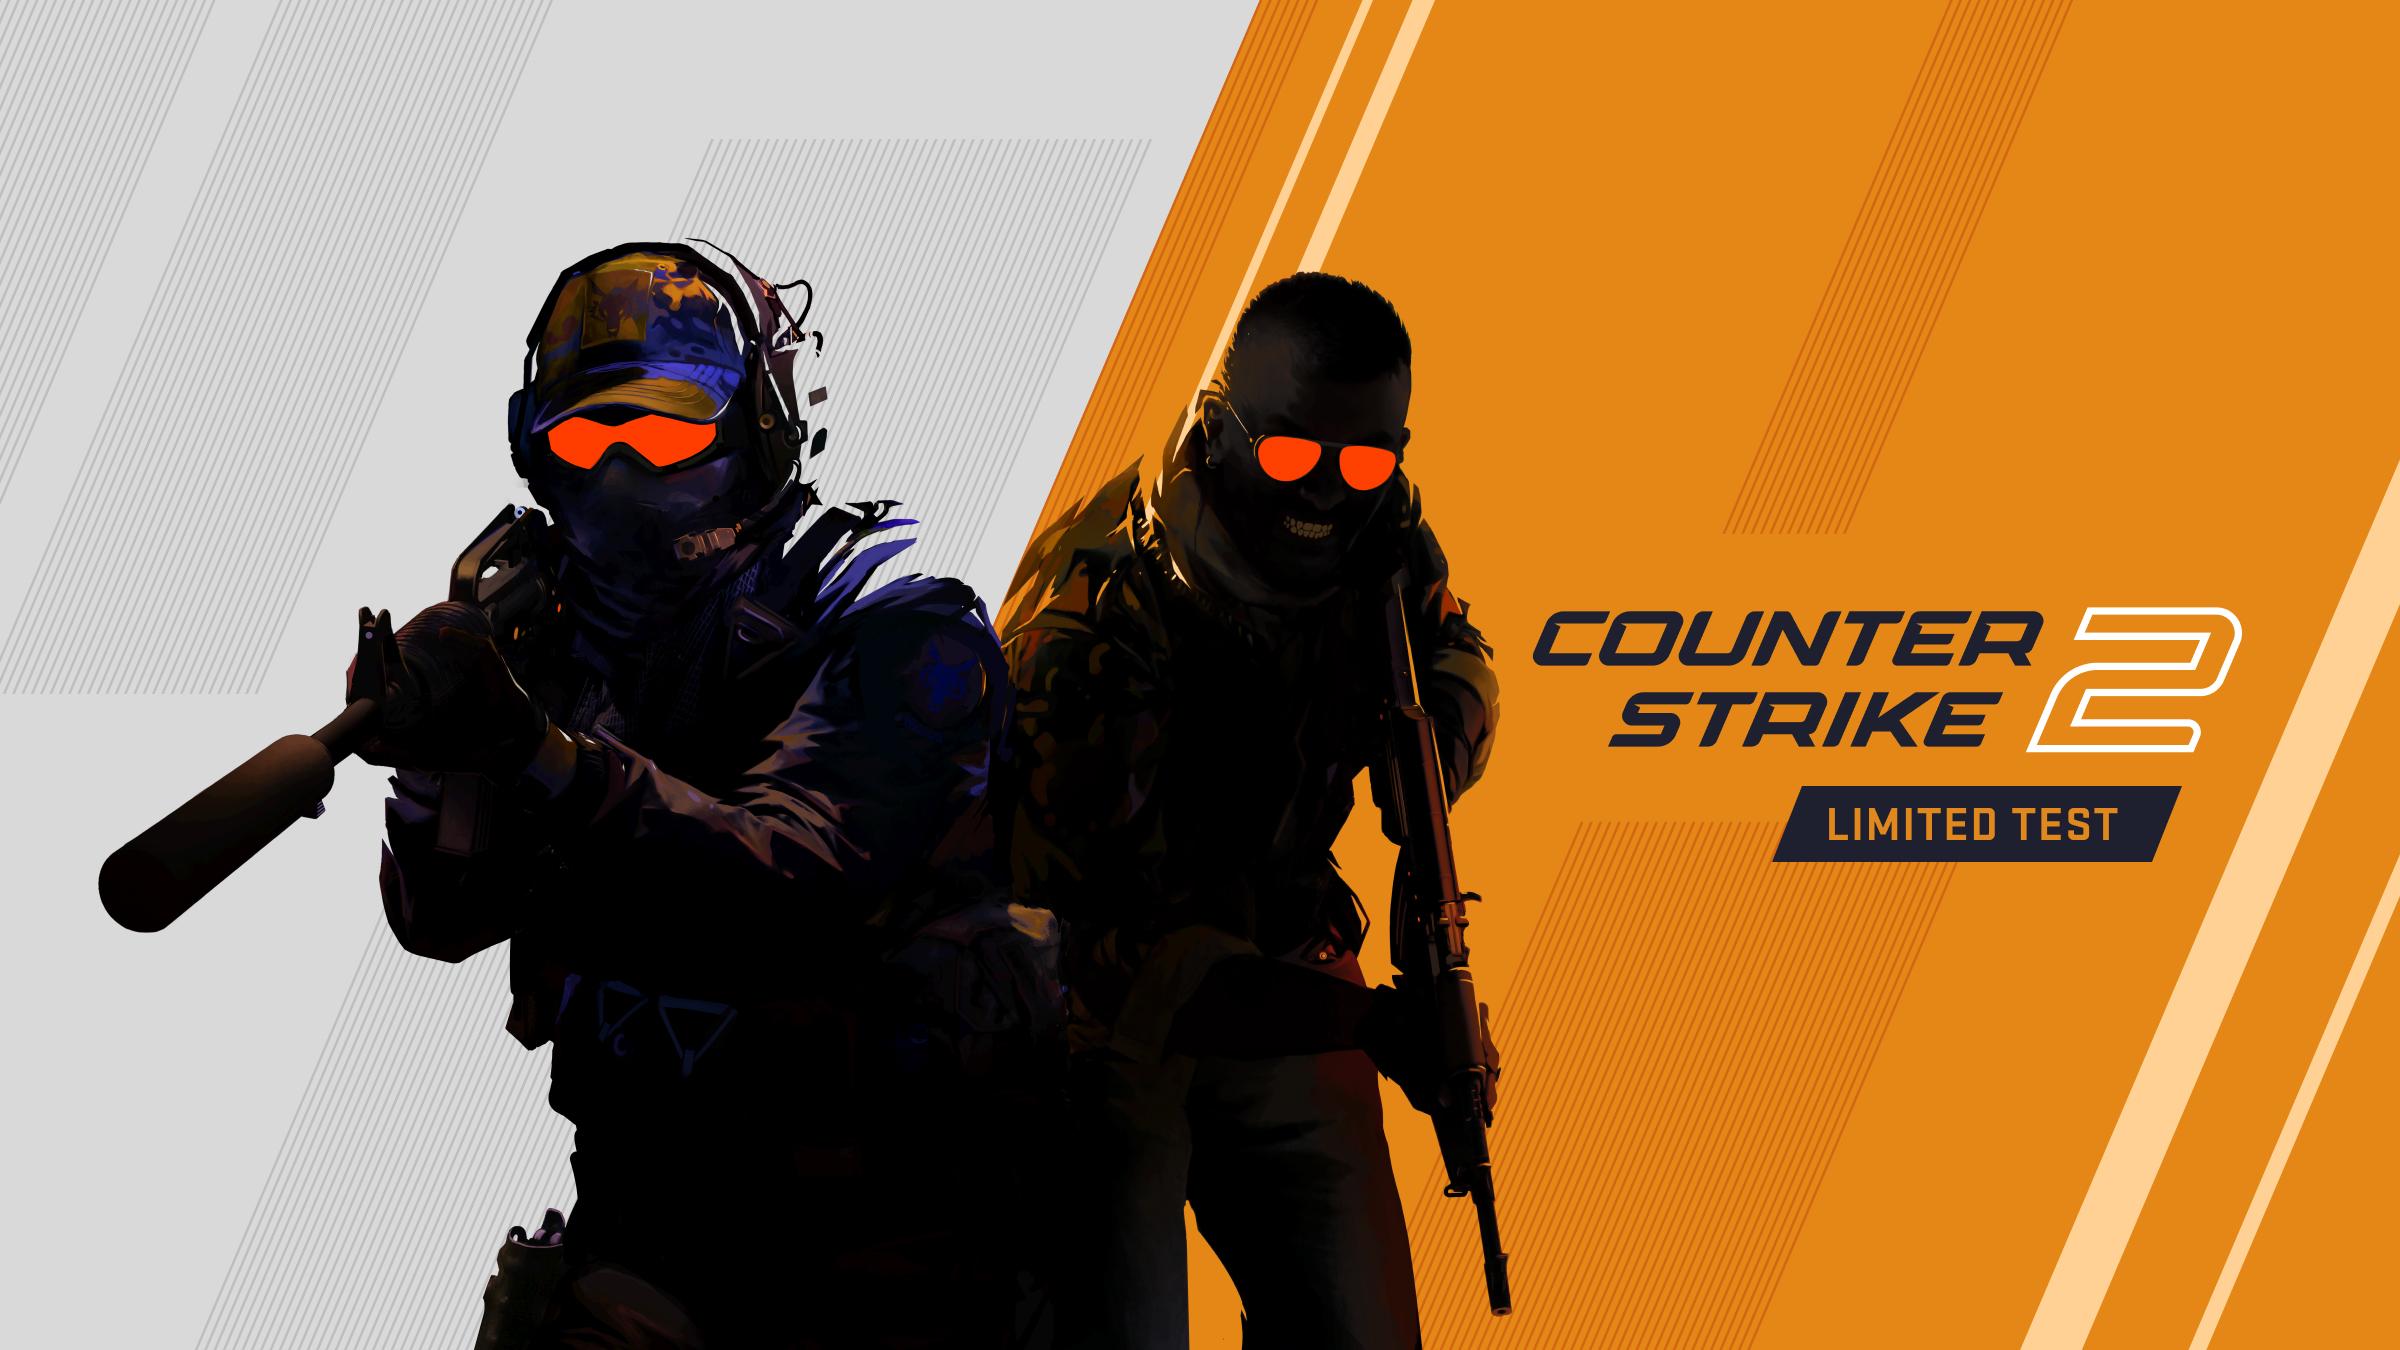 Counter-Strike 2 limited beta